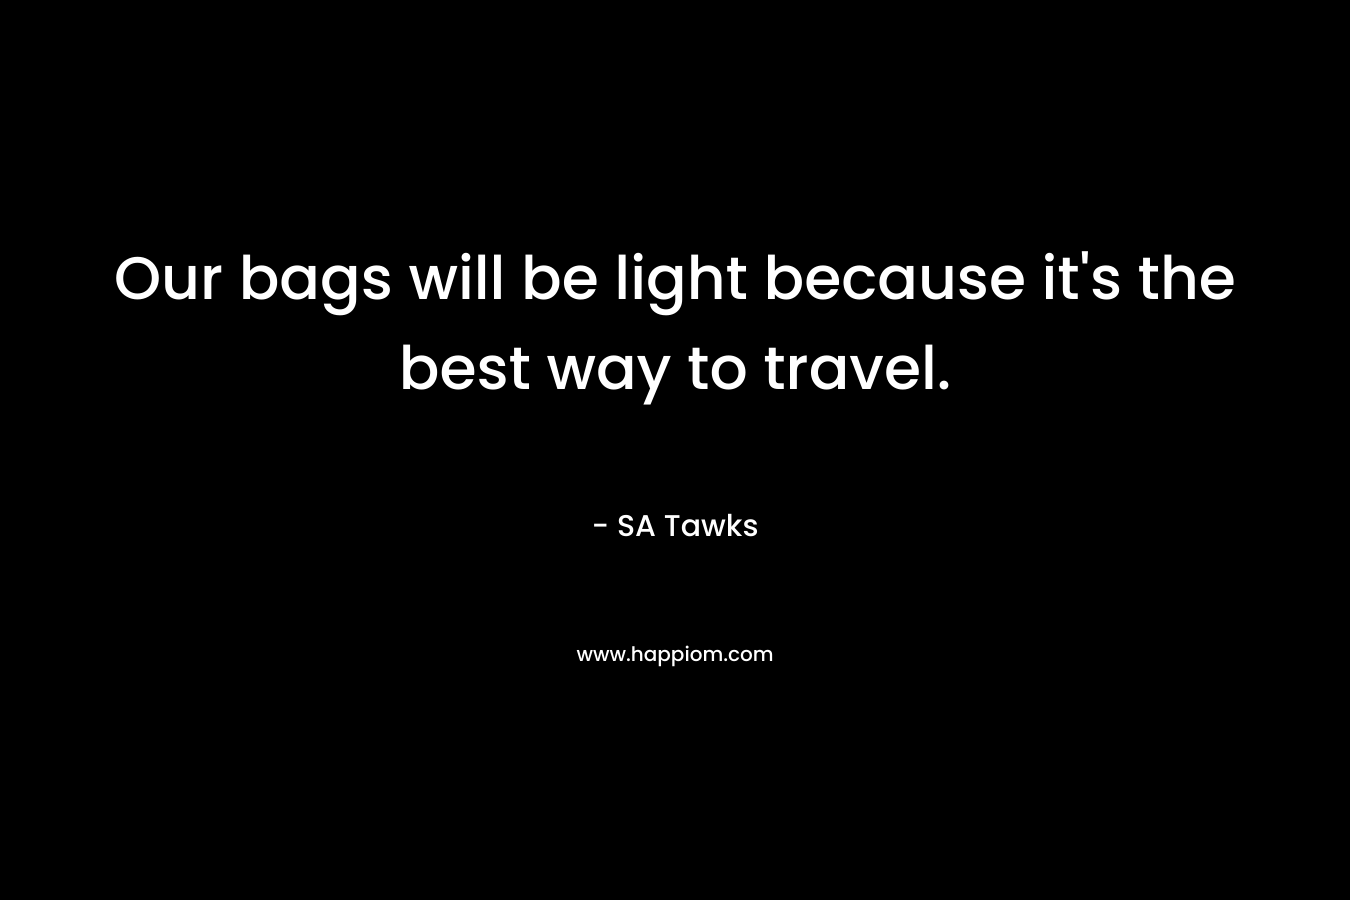 Our bags will be light because it’s the best way to travel. – SA Tawks